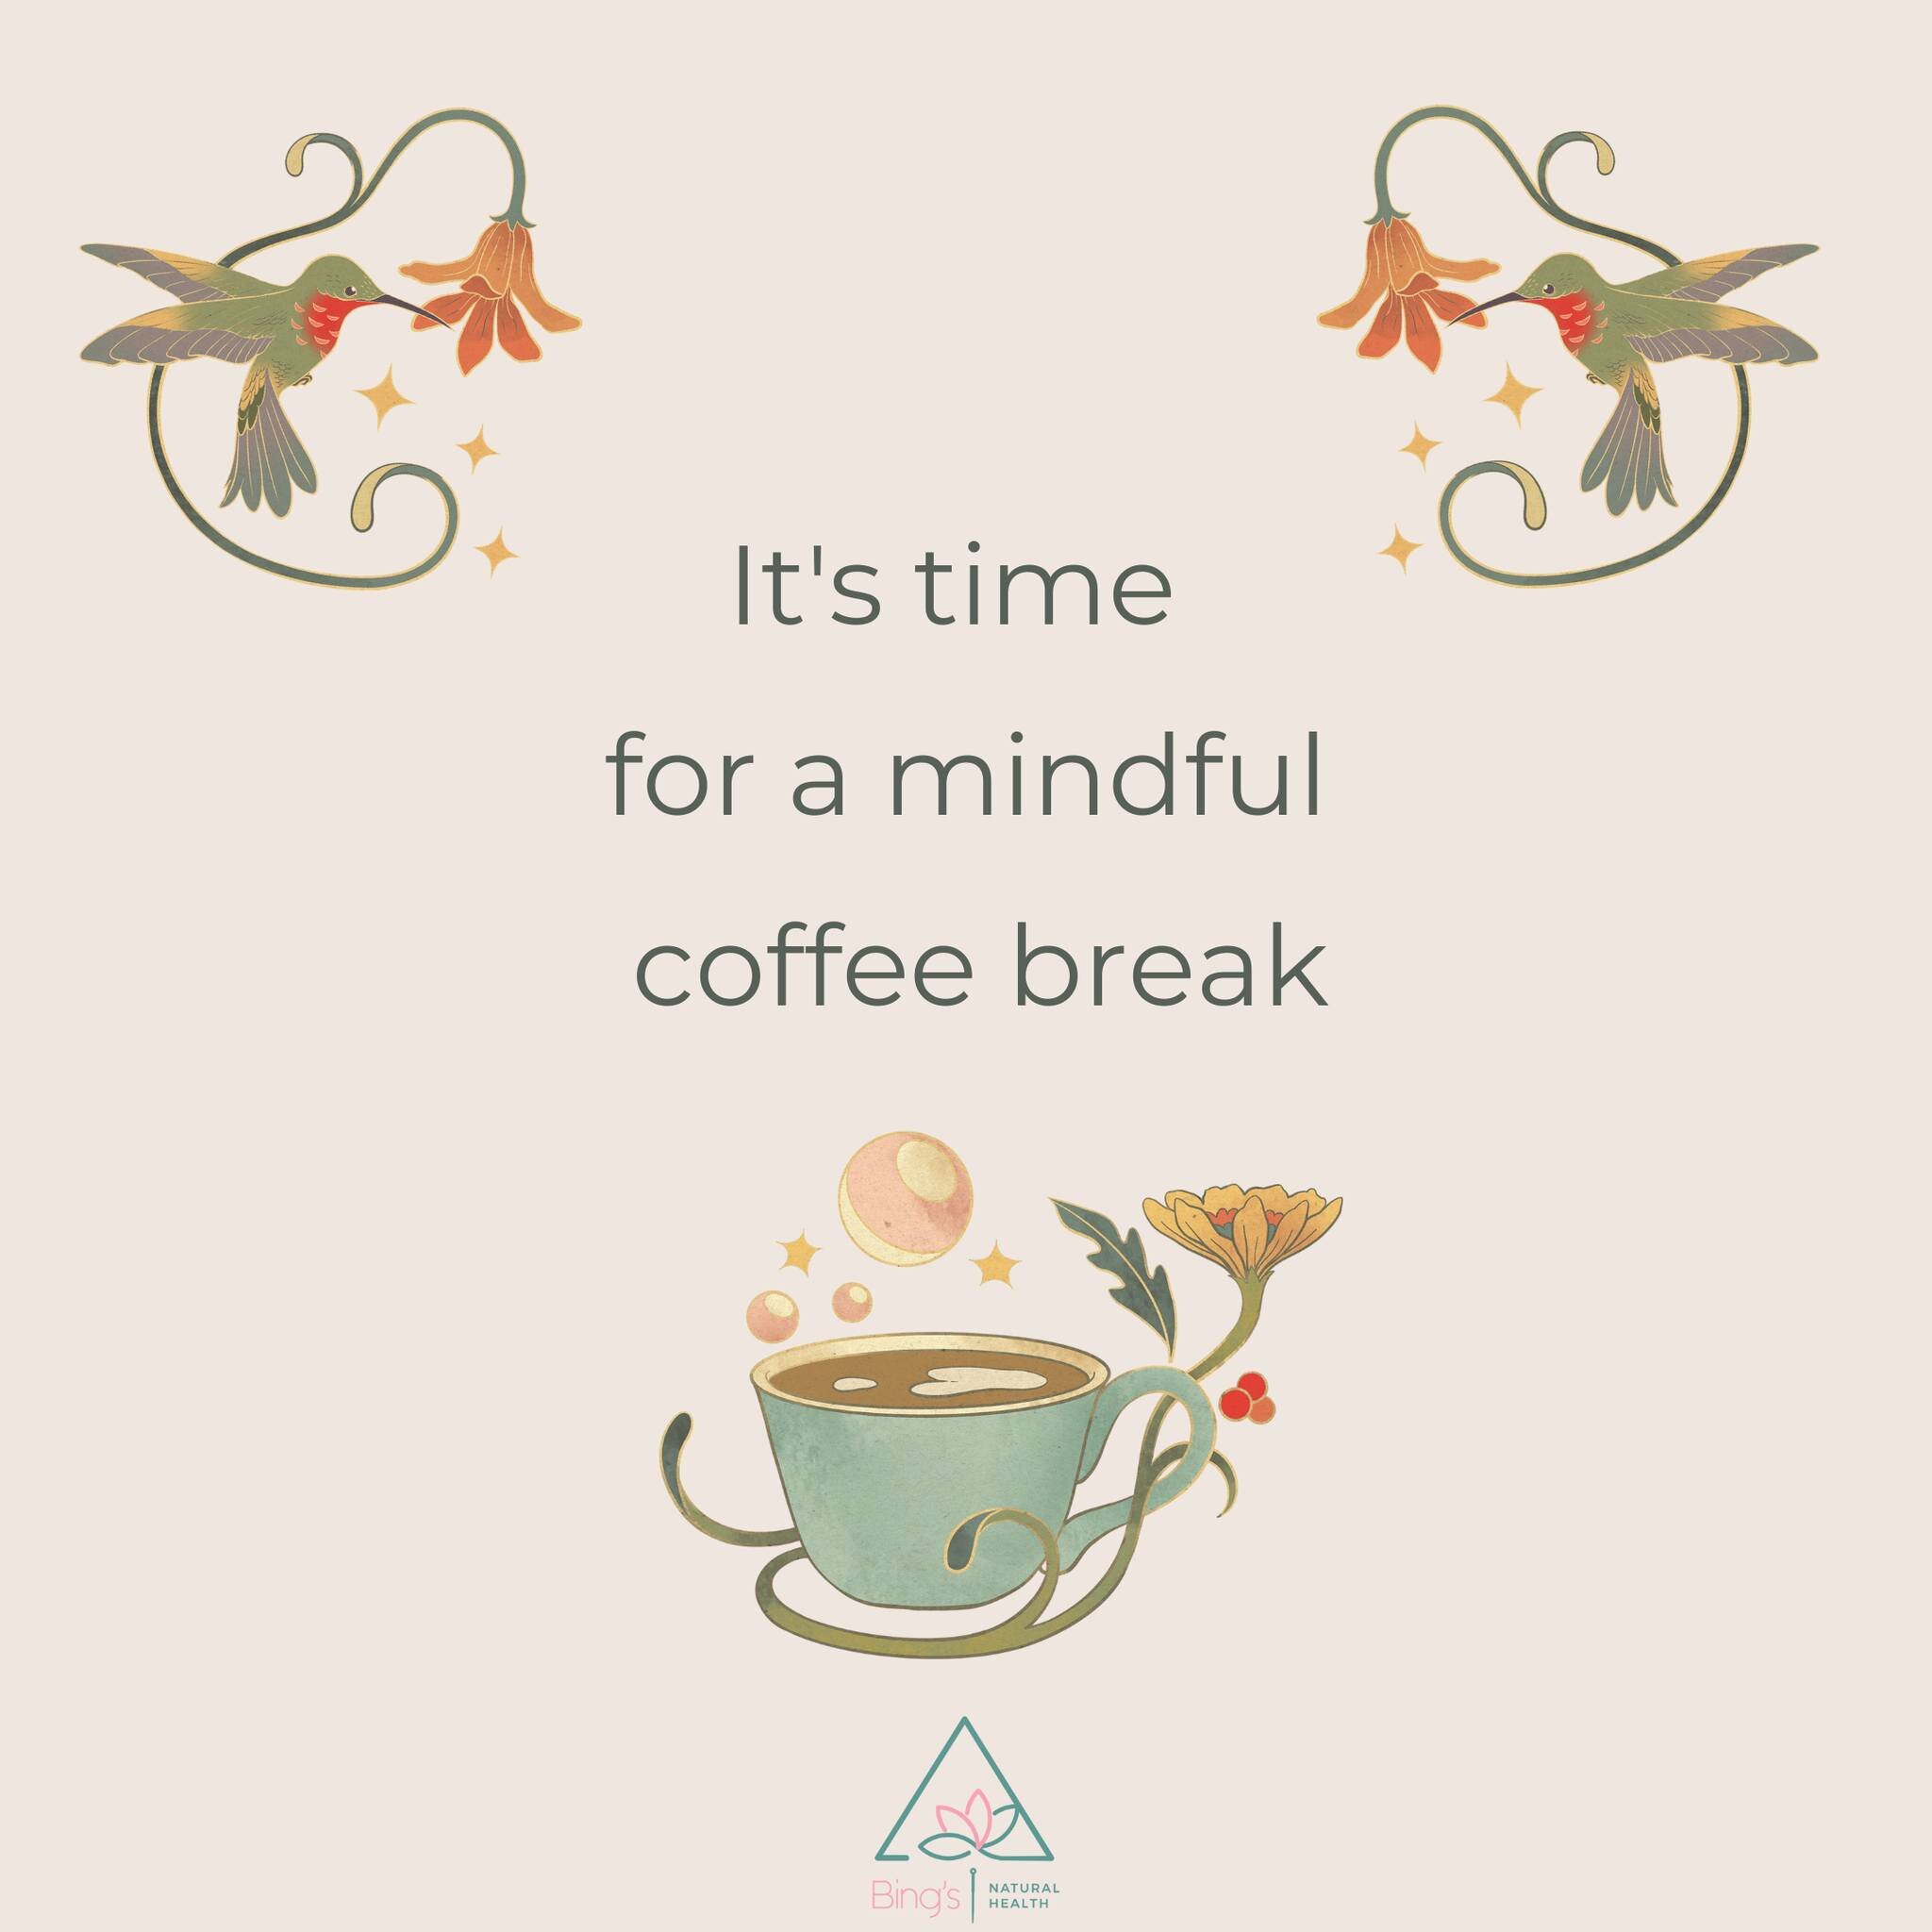 ☕Mindfulness coffee break ☕
One way to slow down and practice mindfulness 
is by taking time out for a coffee break.

Being mindful is bringing your awareness 
to all 5 senses during this welcome break:
 👁️ look
🫲 feel
👃 smell
👄 taste
👂 listen

